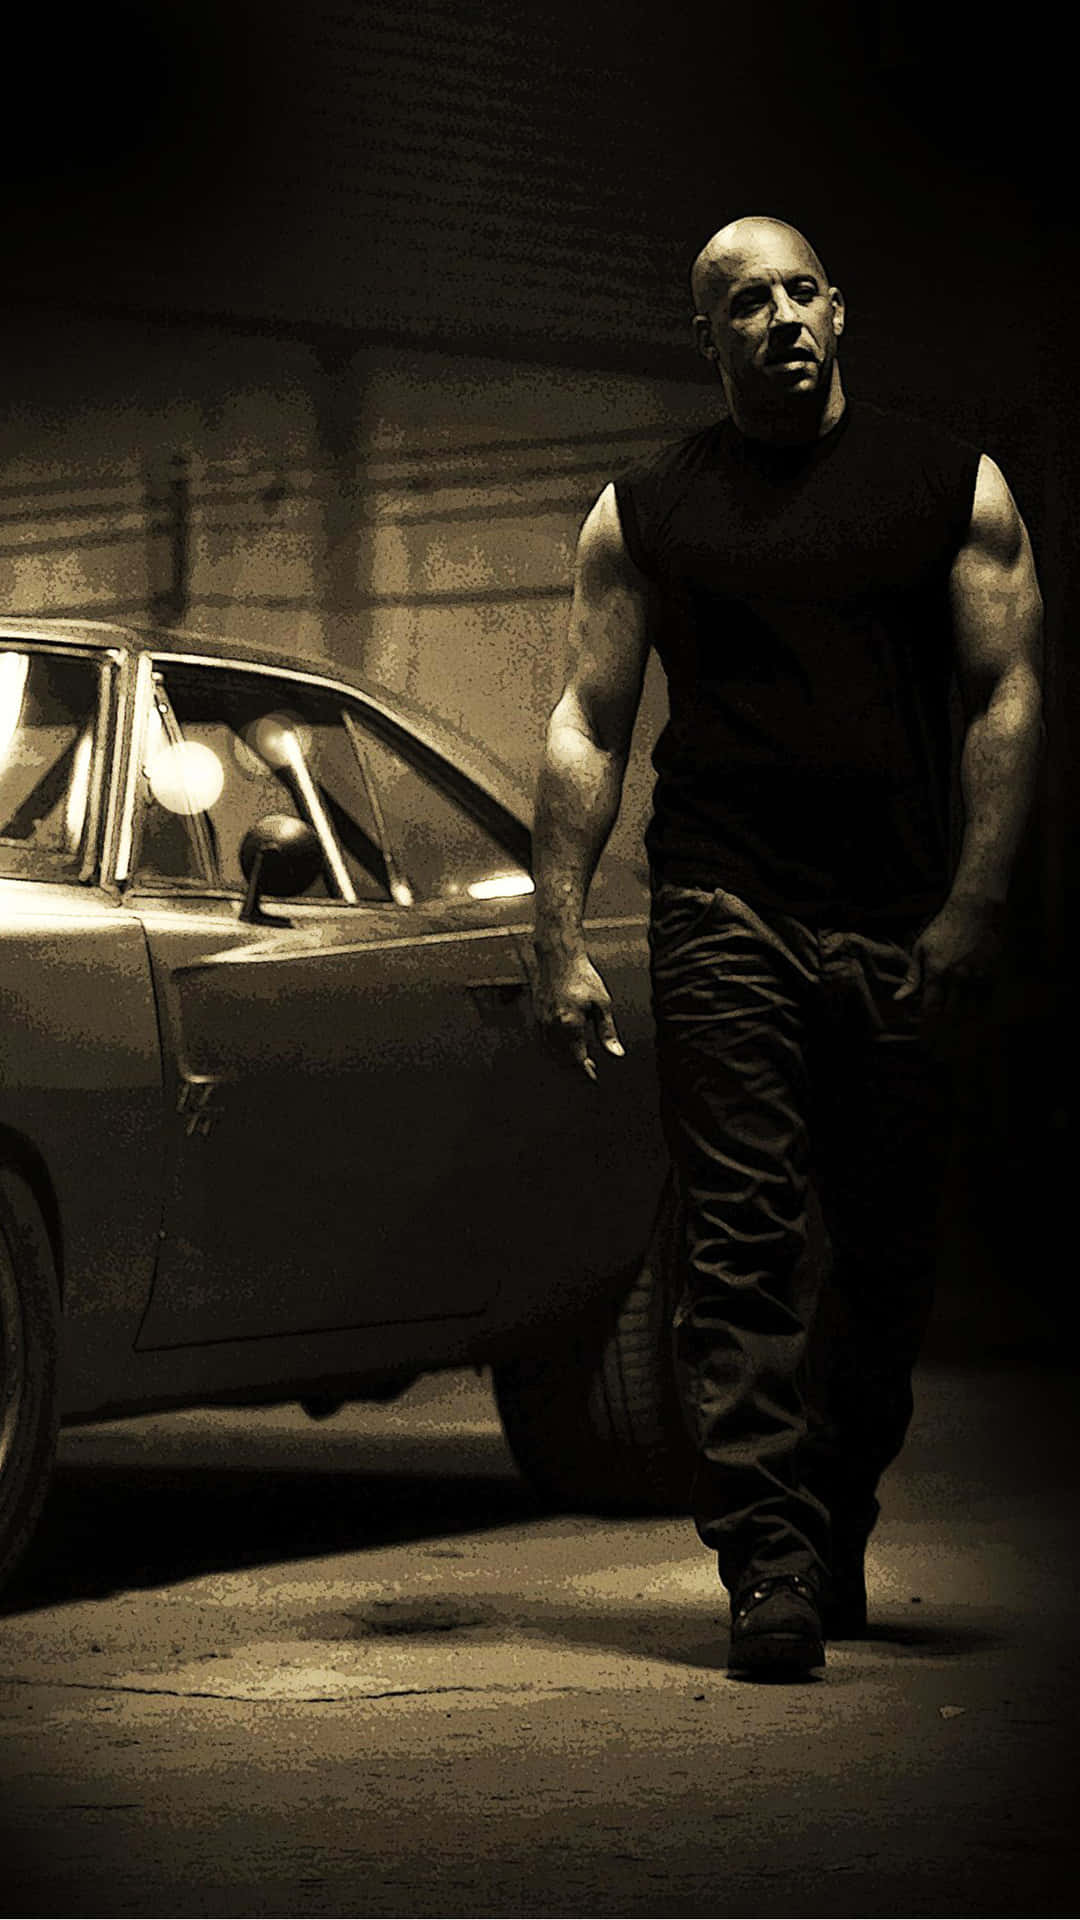 Get ready to rule the streets with the Fast and Furious iPhone Wallpaper